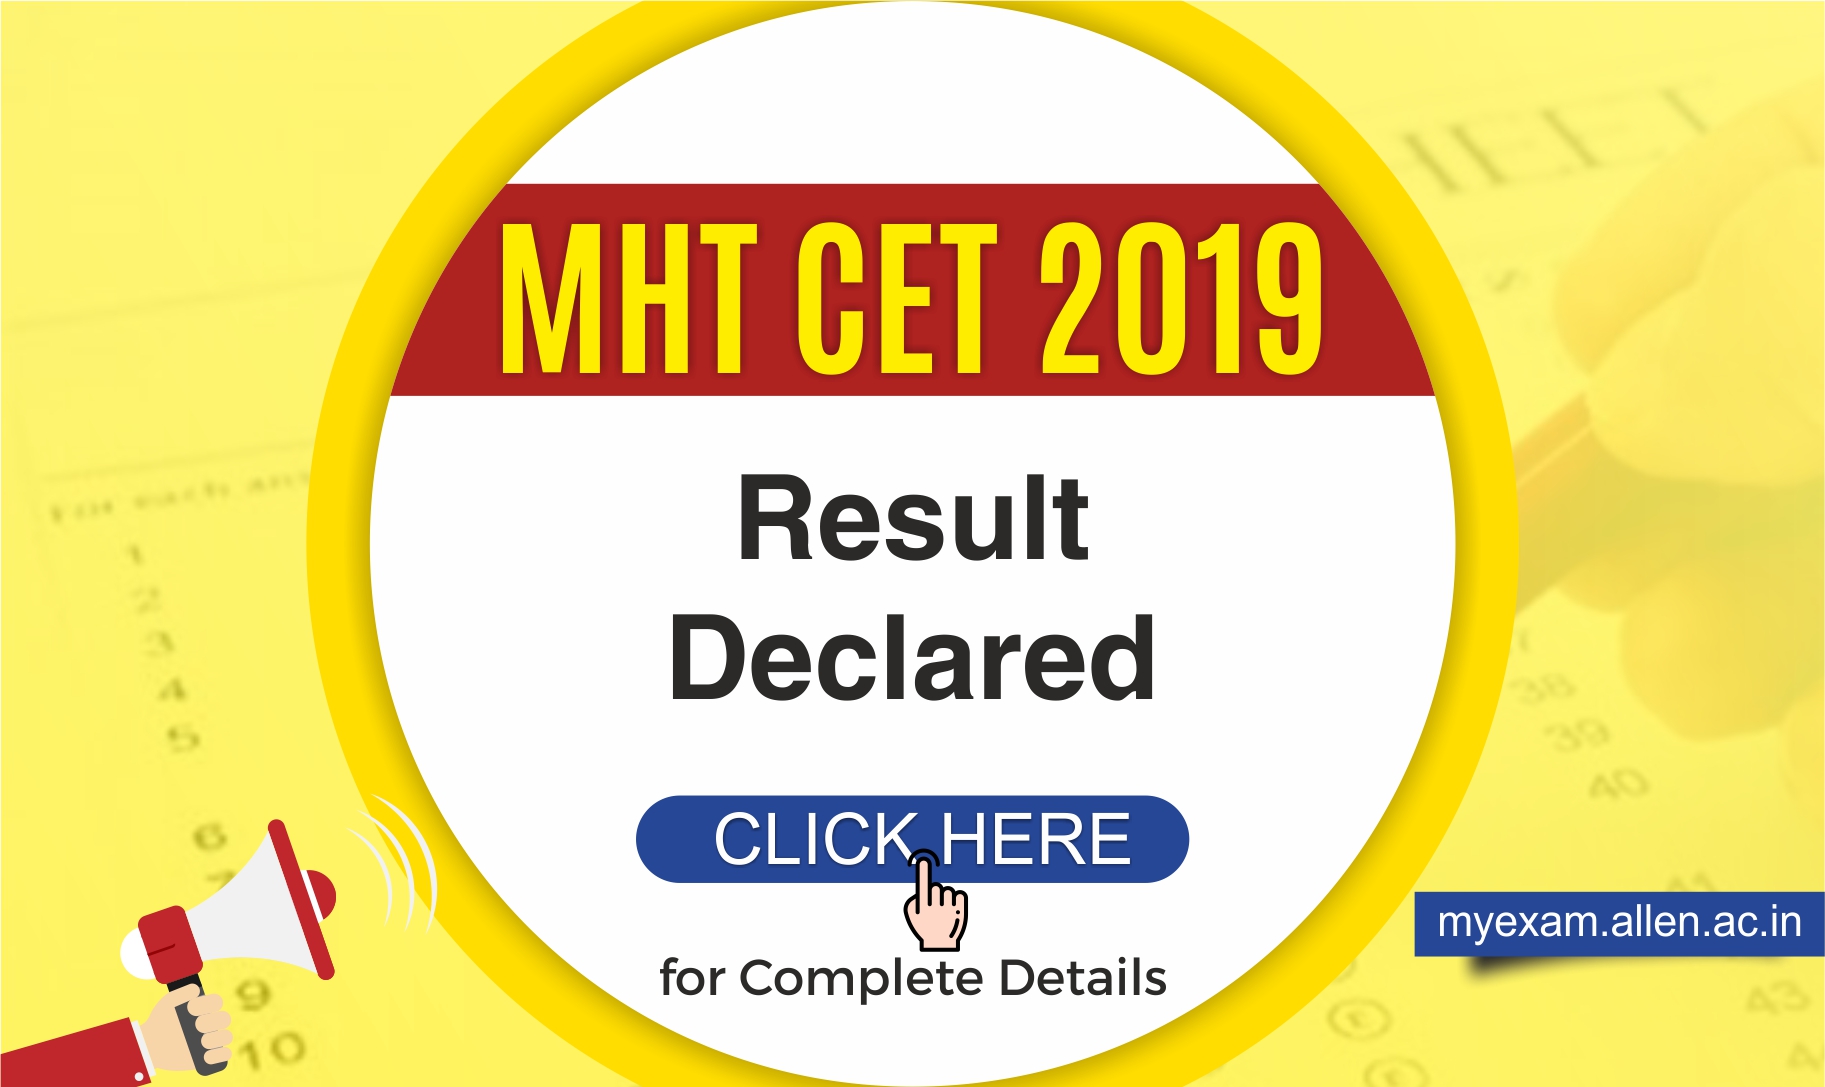 MHT CET 2019 Result declared. Check here